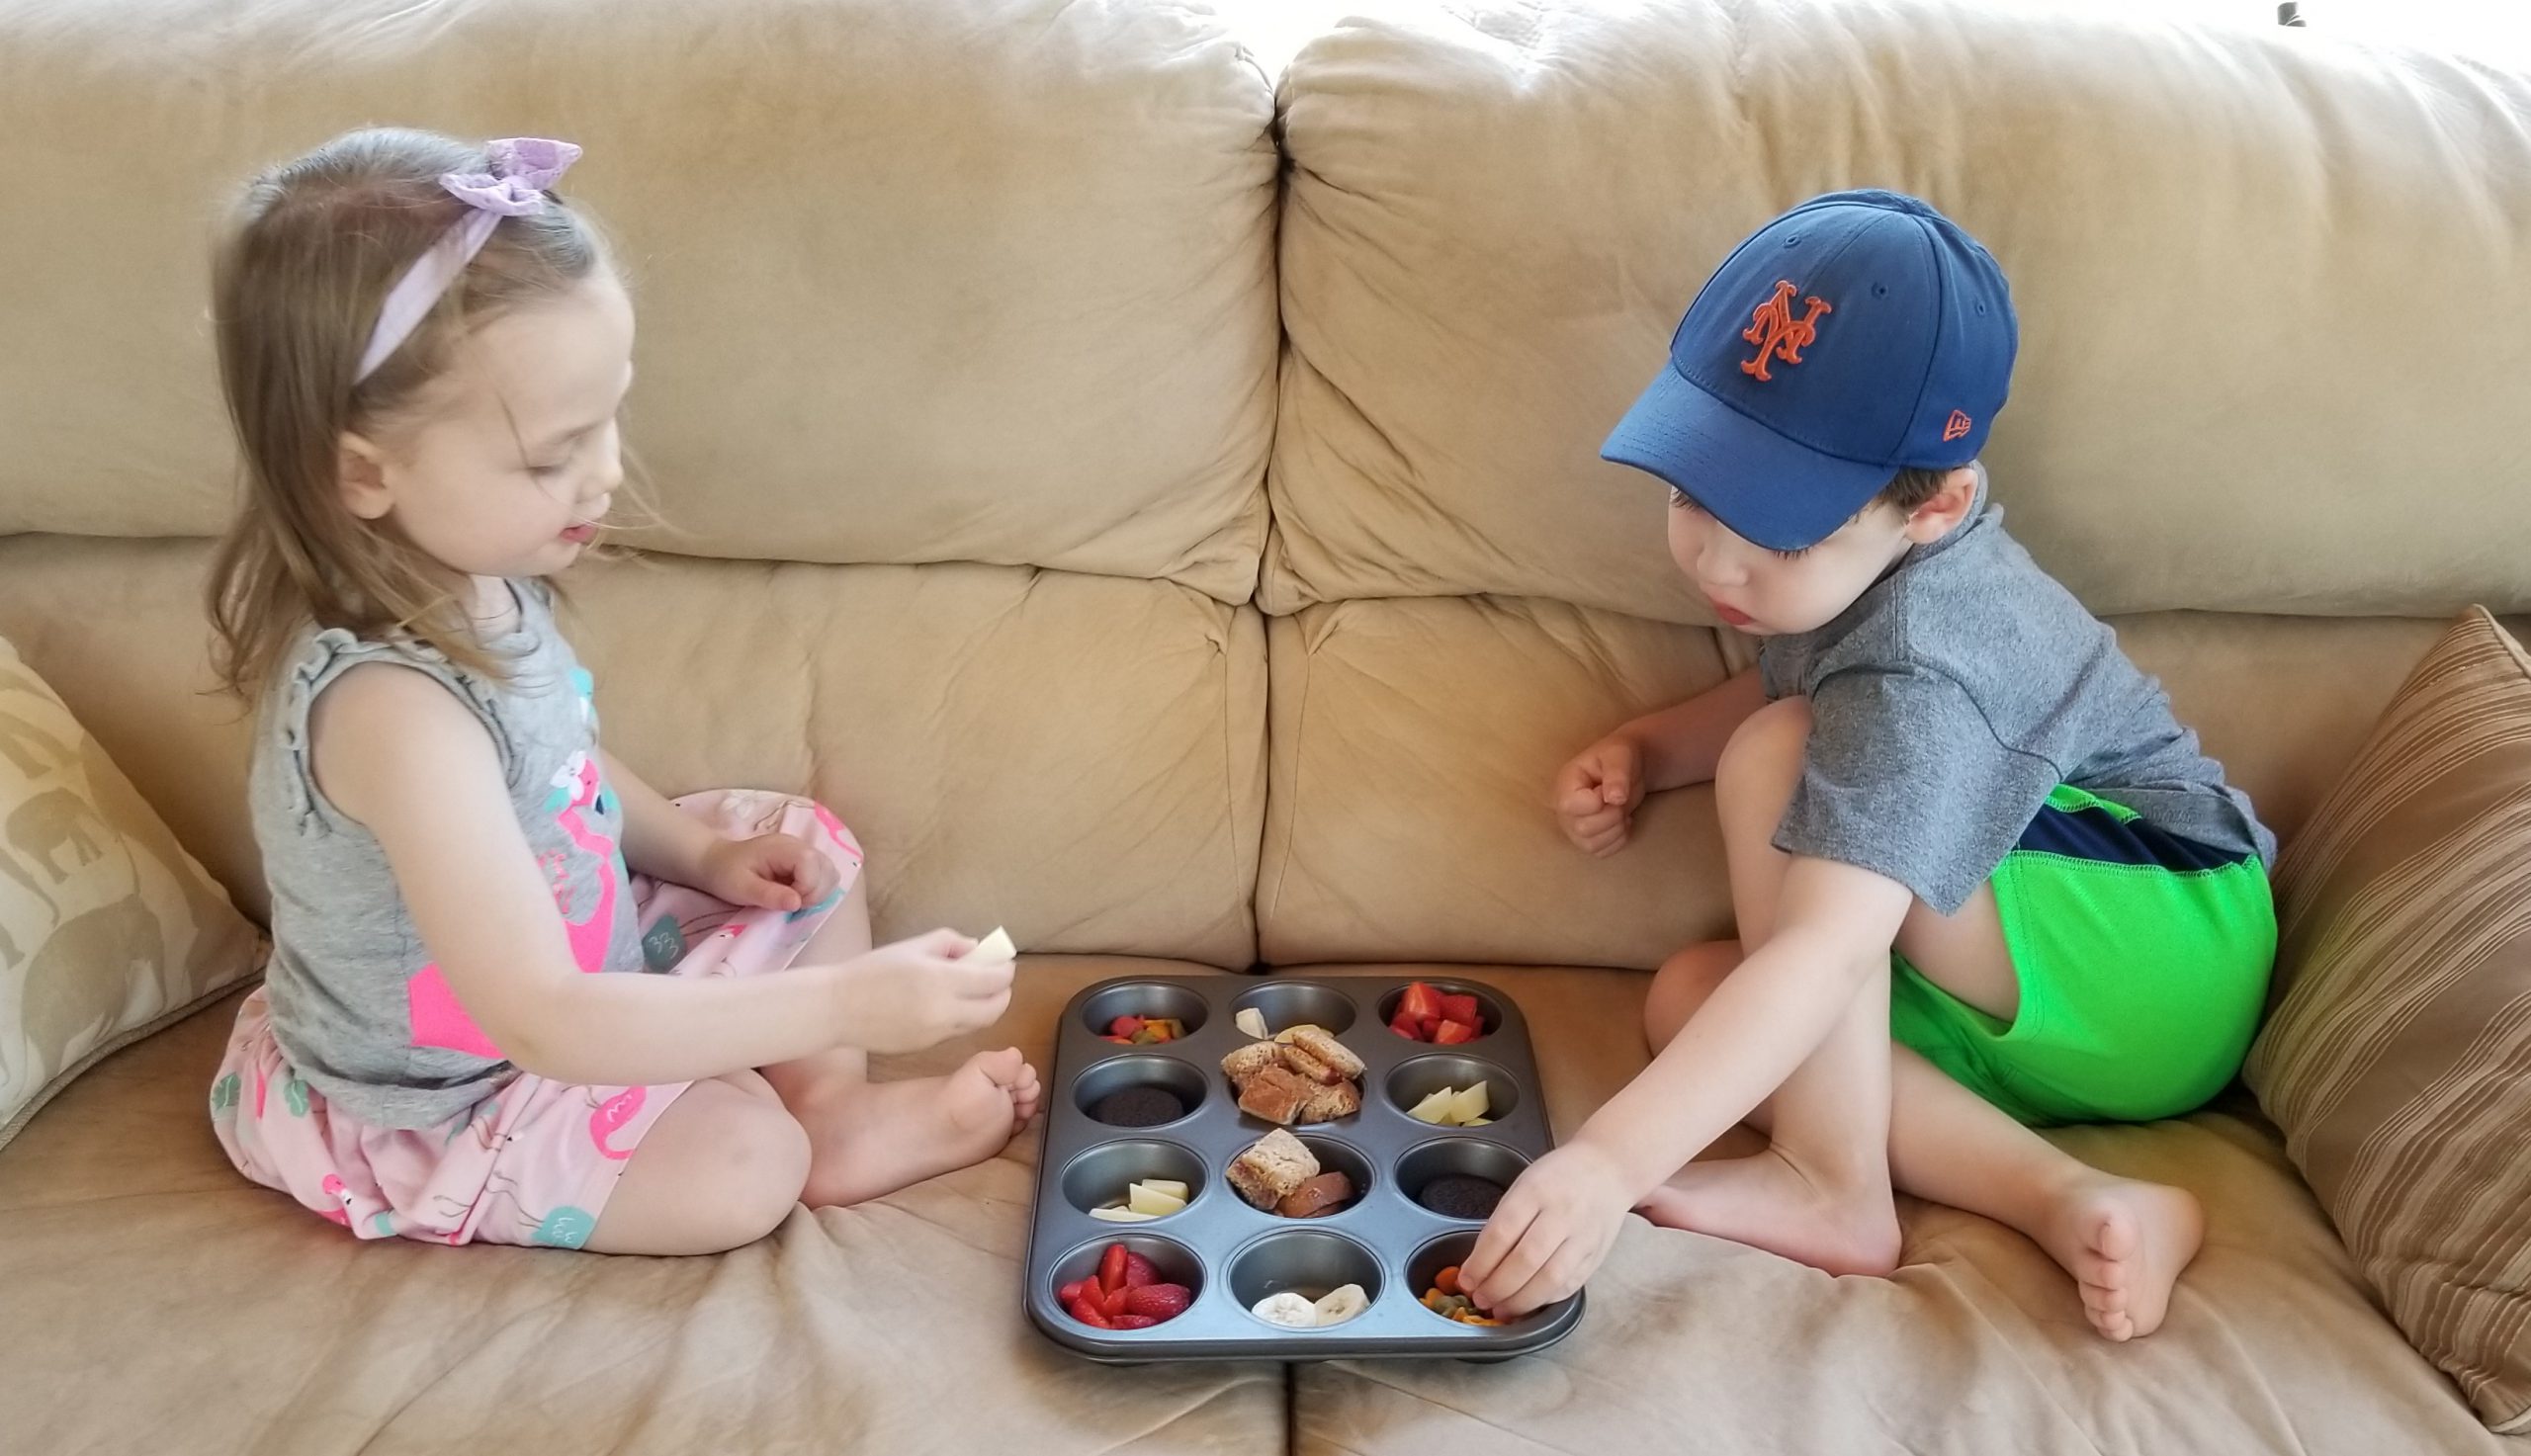 Two young children sit on a couch, a muffin tin filled with snacks between them, and select snacks to taste.